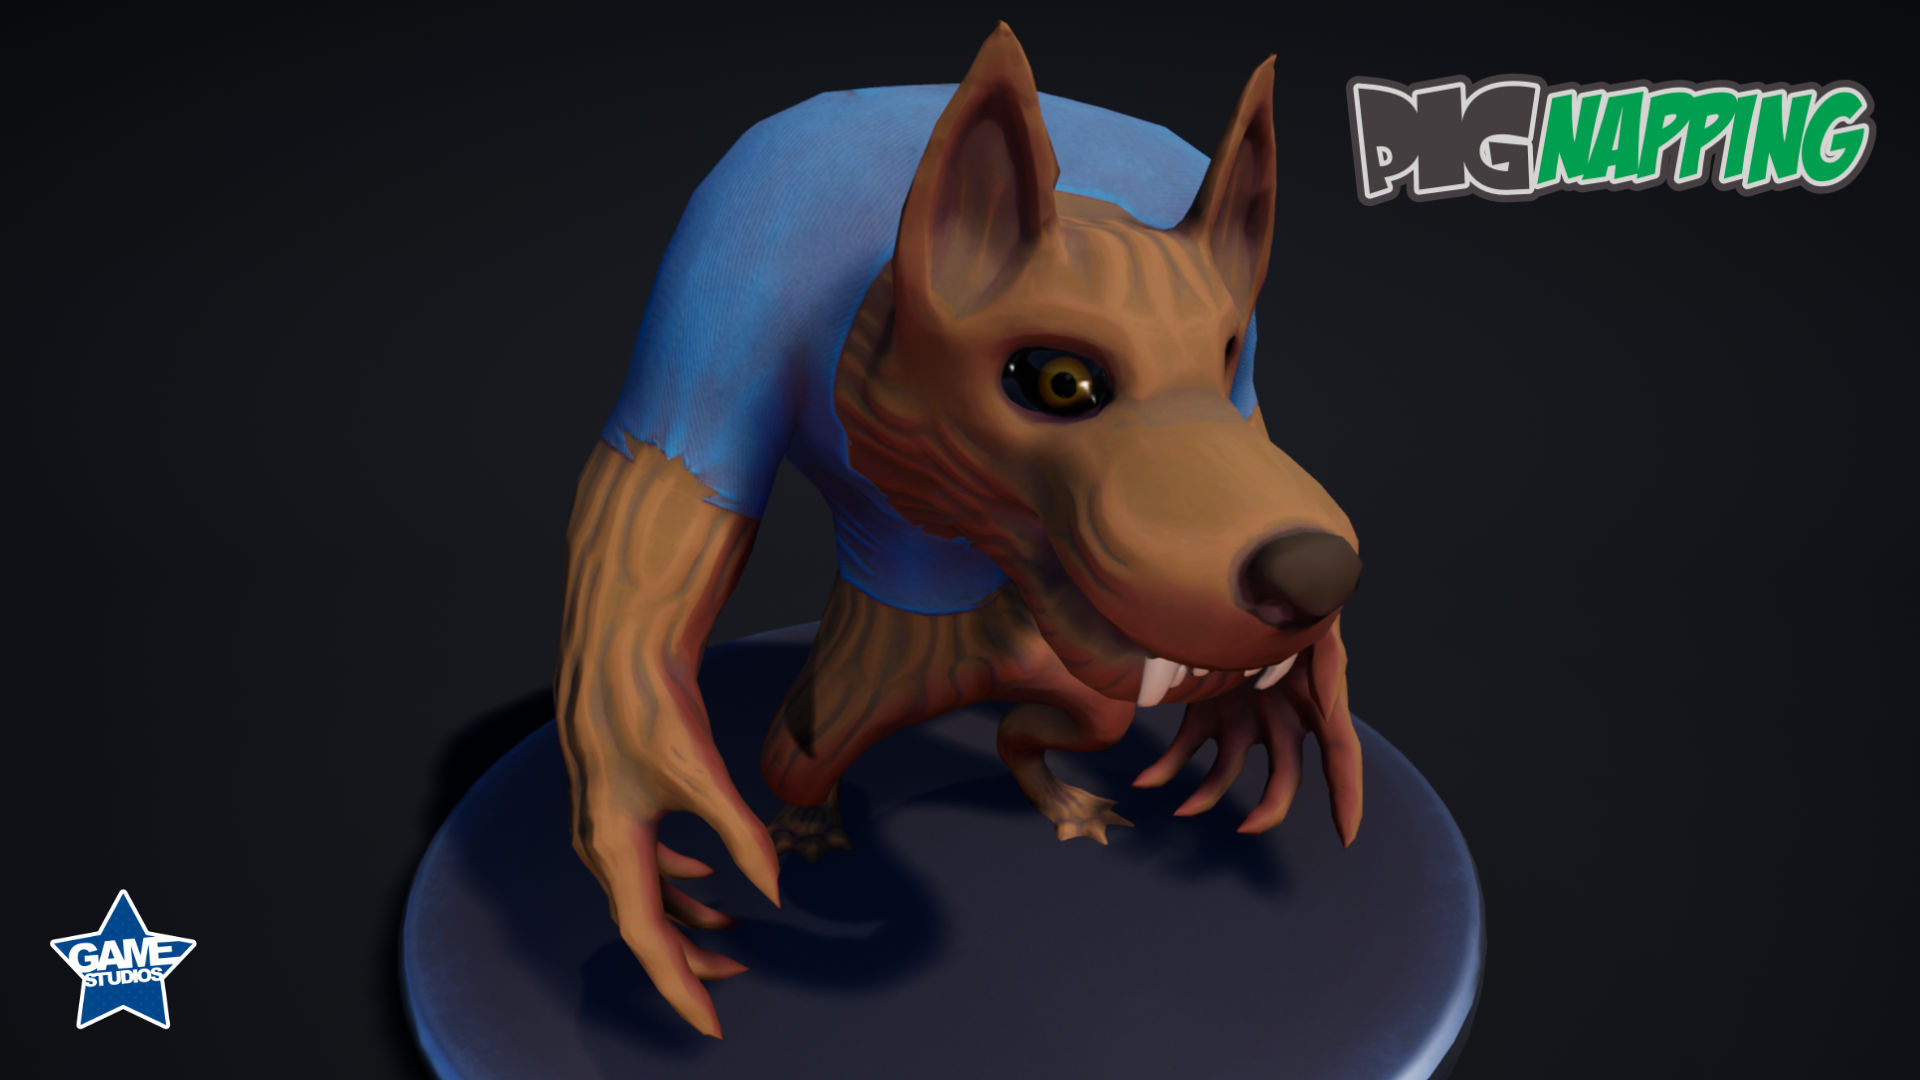 Front - Wolf 3d Character - PigNapping